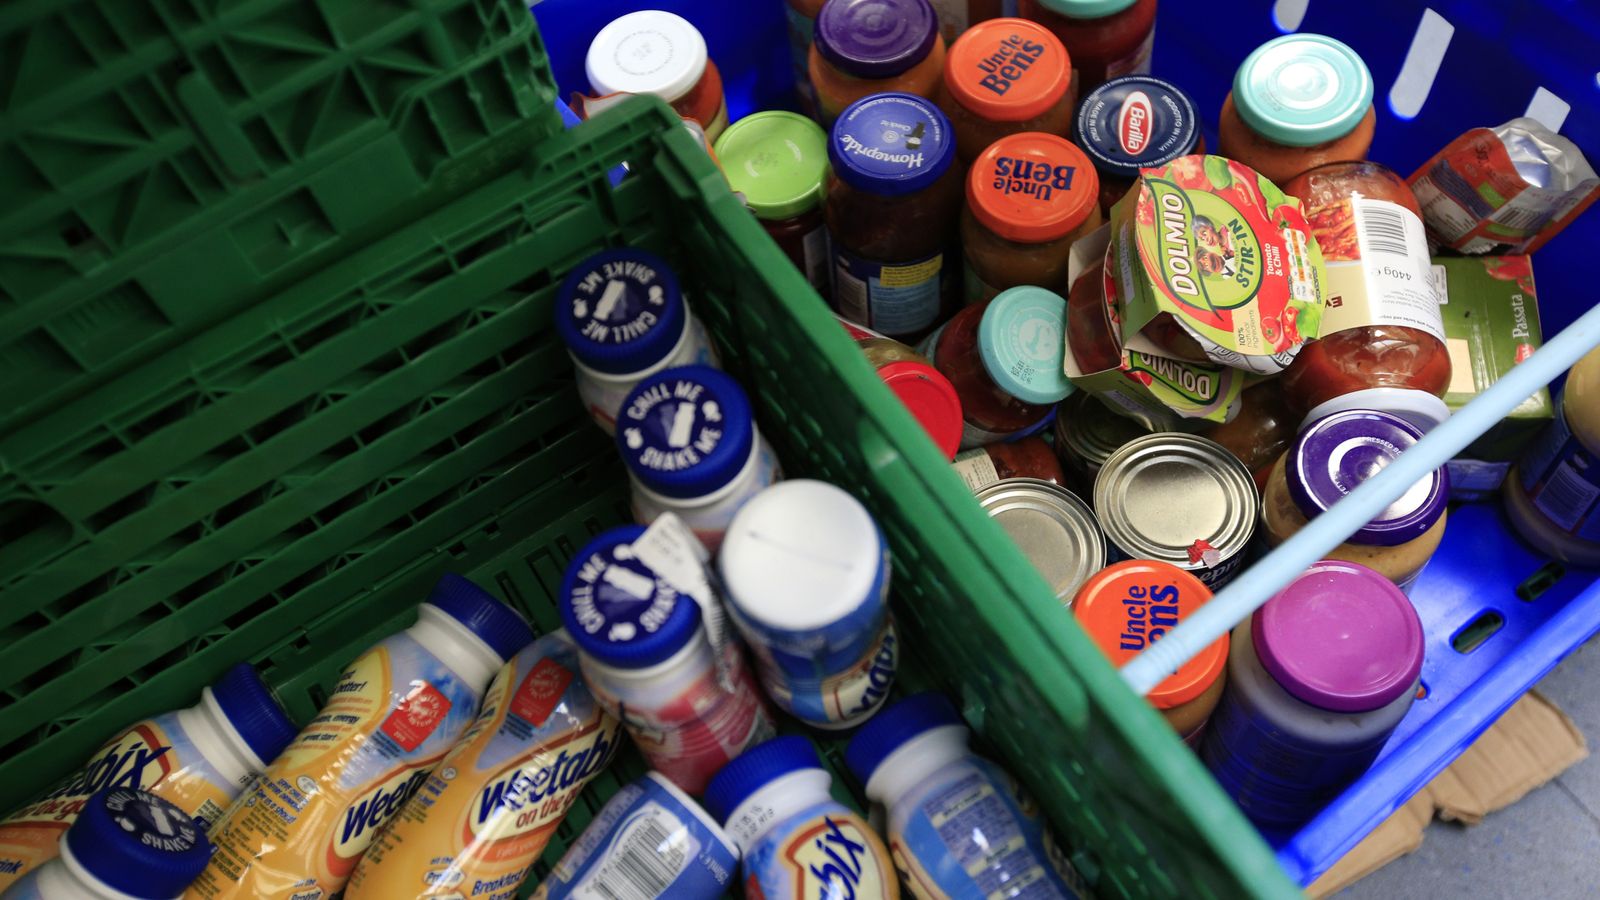 Citizens Advice helps record number of people with thousands needing foodbanks